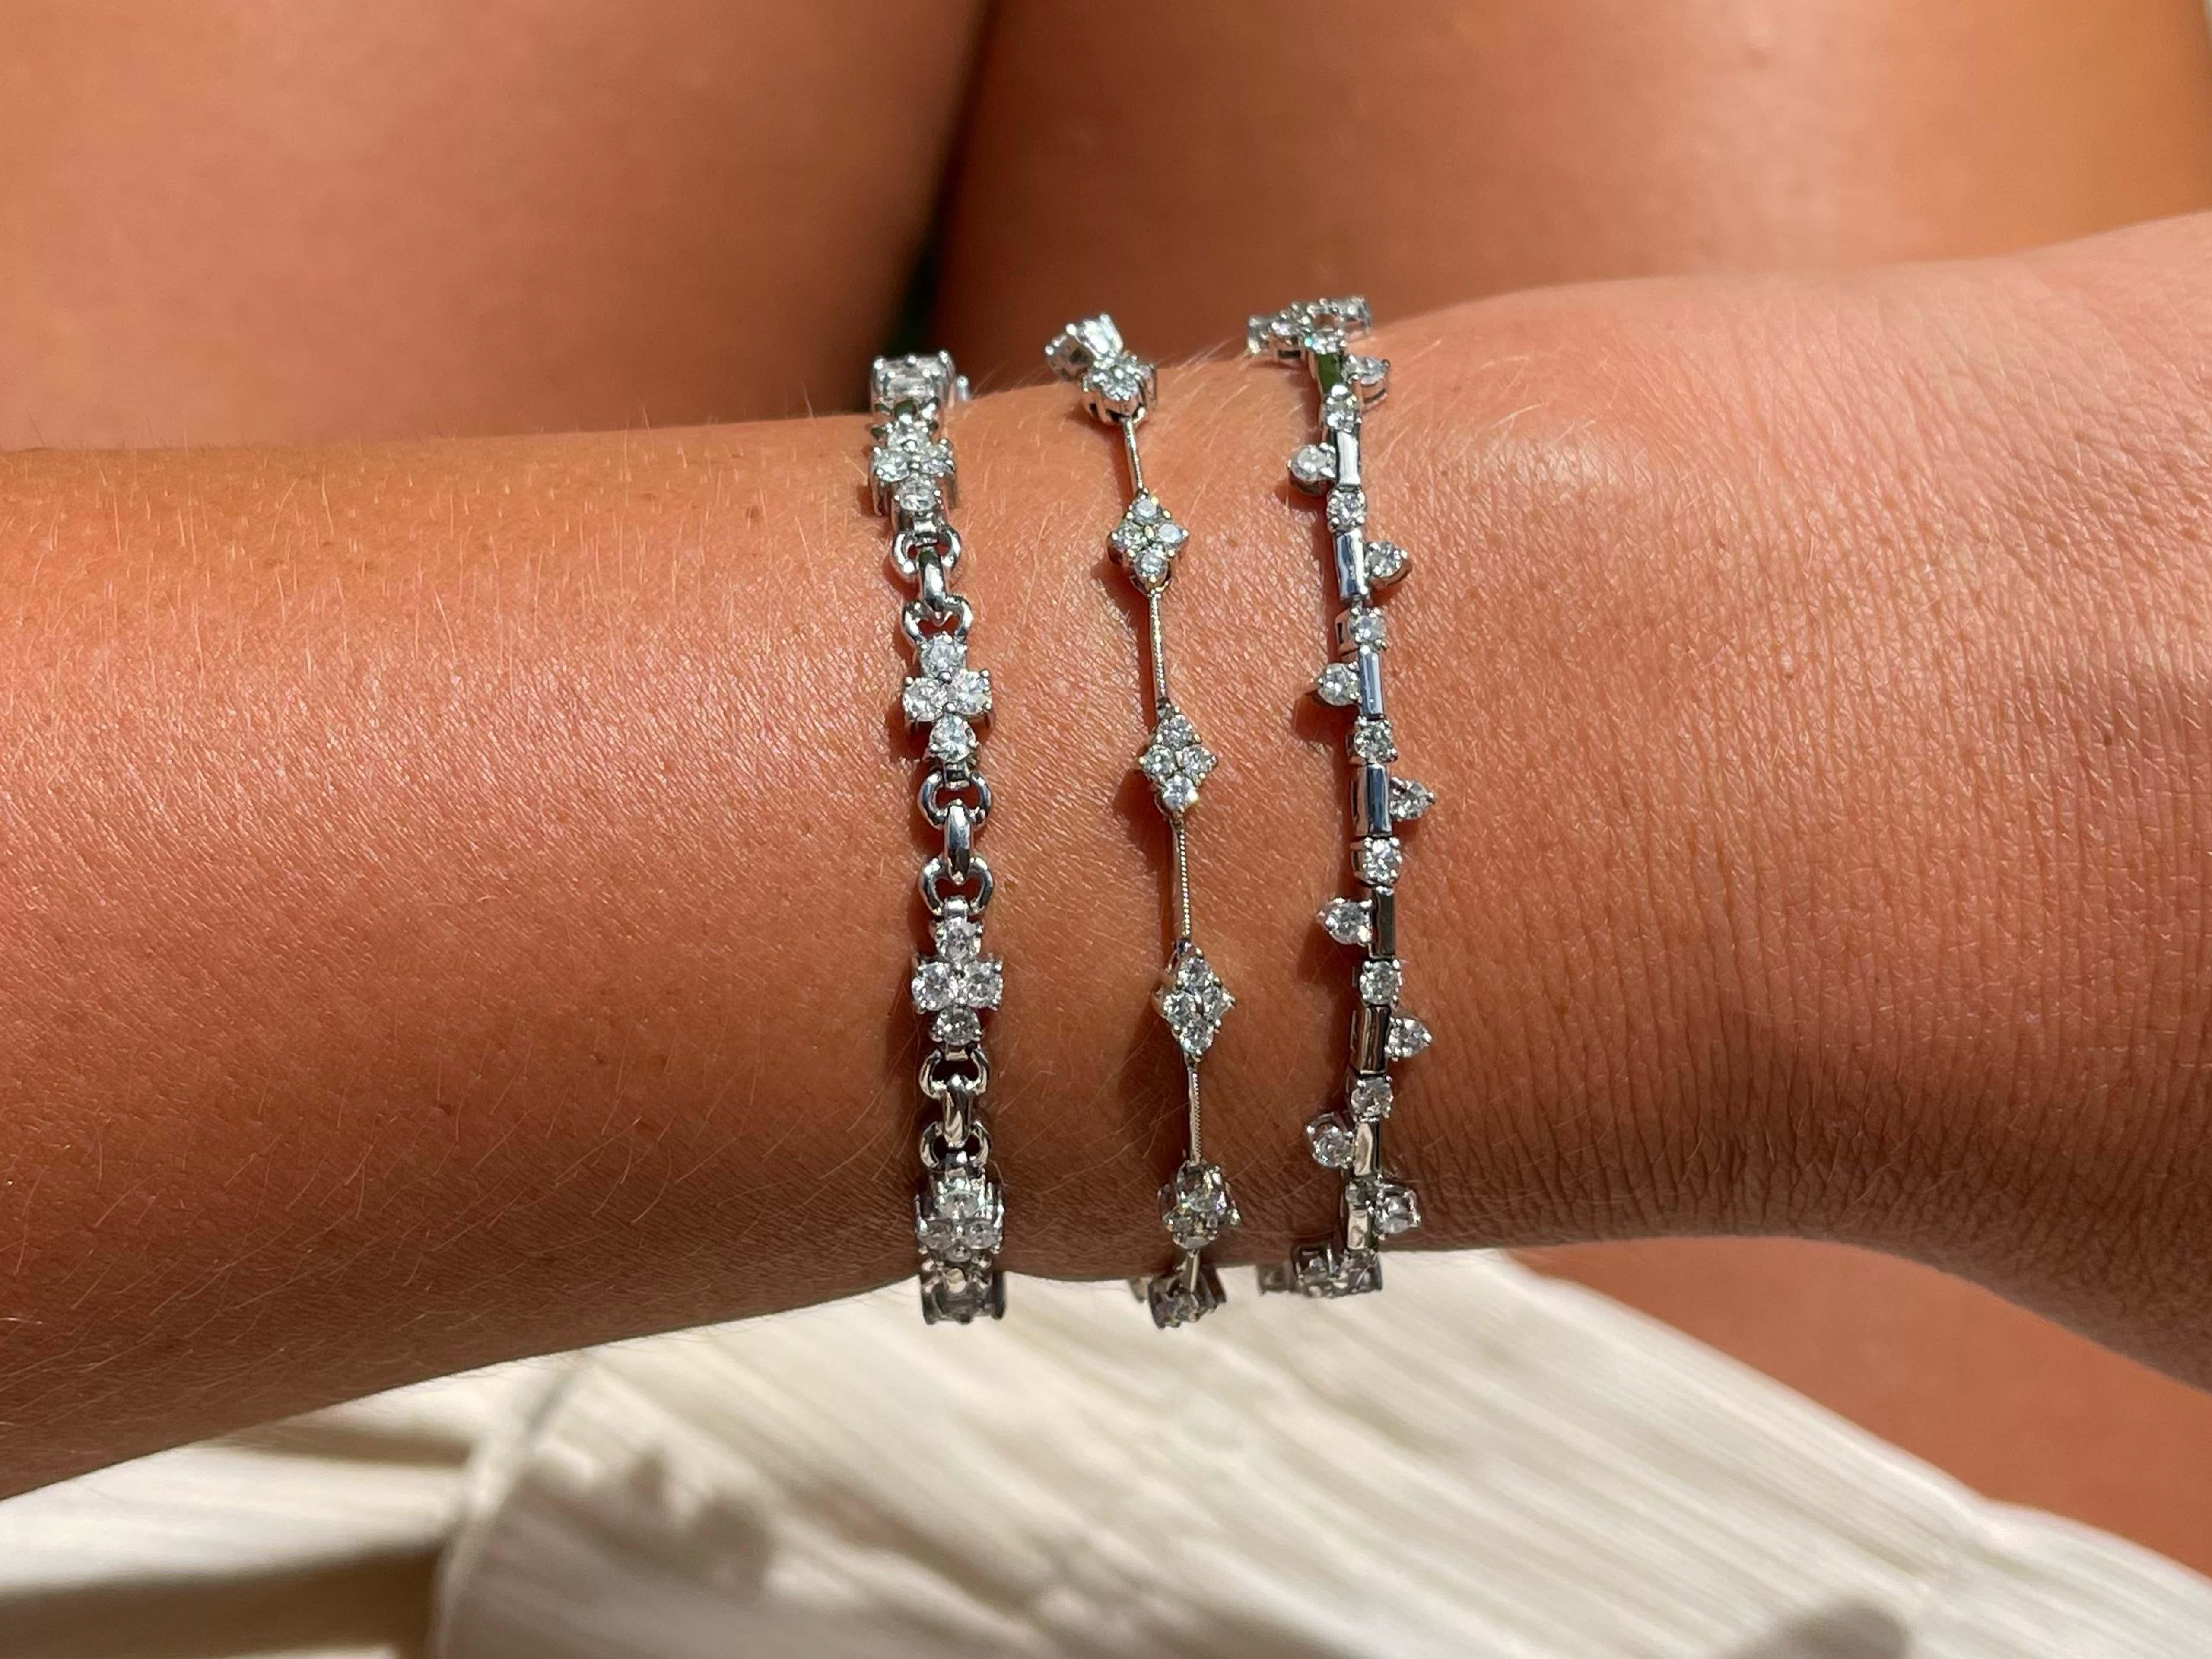 Bracelet Specifications:

Metal: 14k White Gold

Diamond Count: 44

Diamond Carat Weight: 2.5

Diamond Color: F-G

Diamond Clarity: SI

Bracelet Length: ~7 inches

Bracelet Width: ~ 5.16 mm

Total Weight: 10.8 Grams

Condition: Vintage, Excellent
